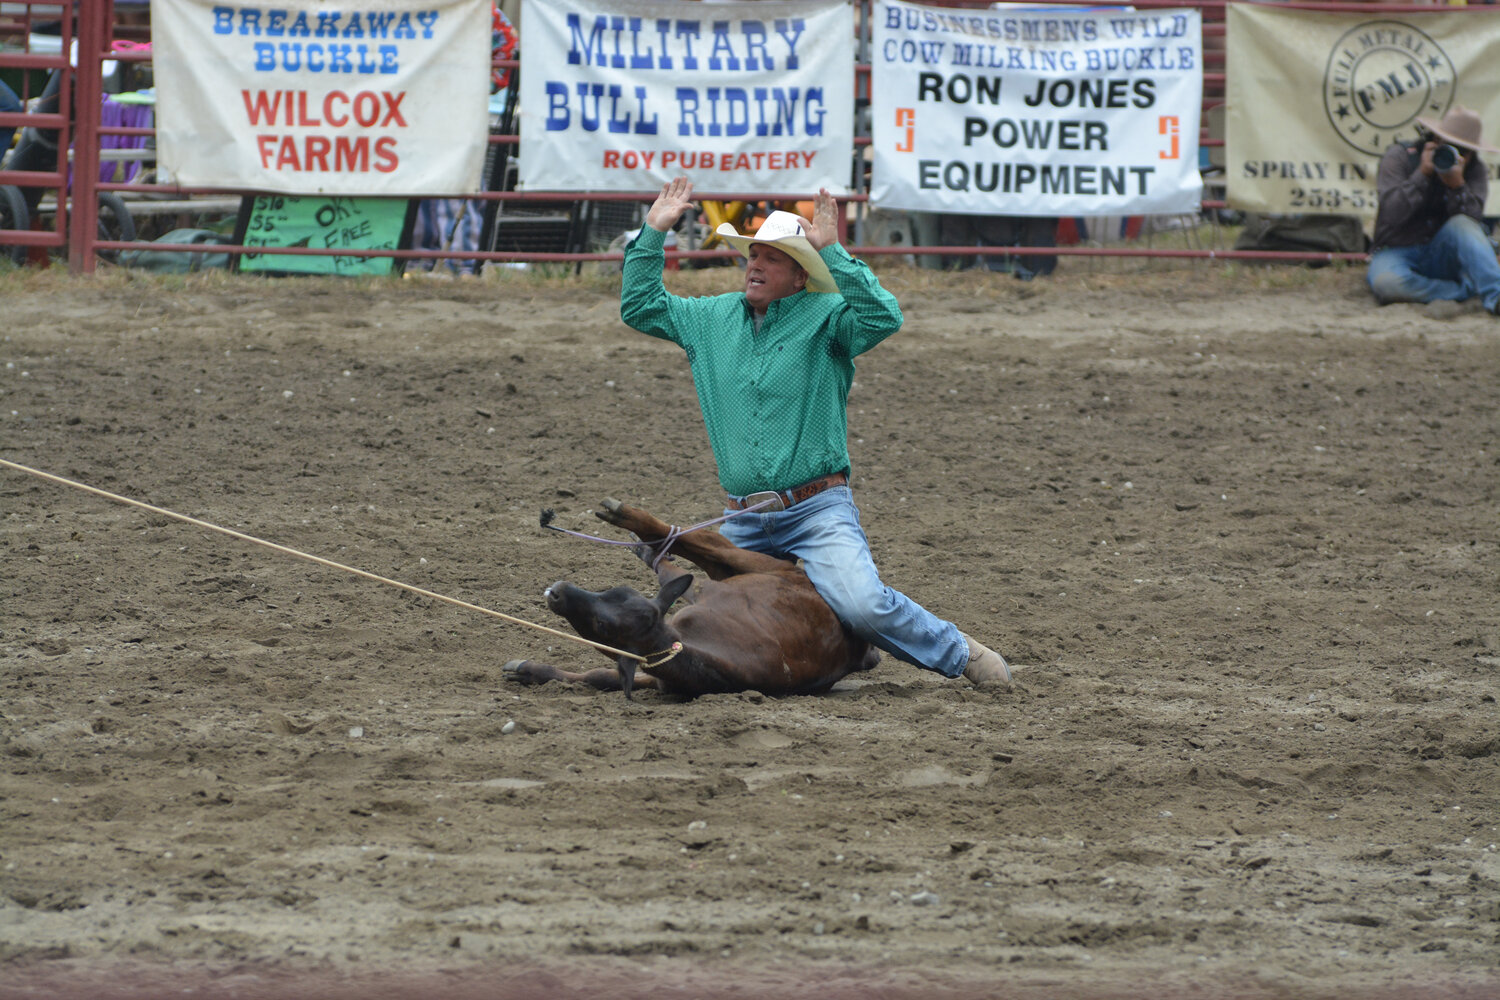 A cowboy throws his hands in the air to signal that he completed the tie-down roping competition.